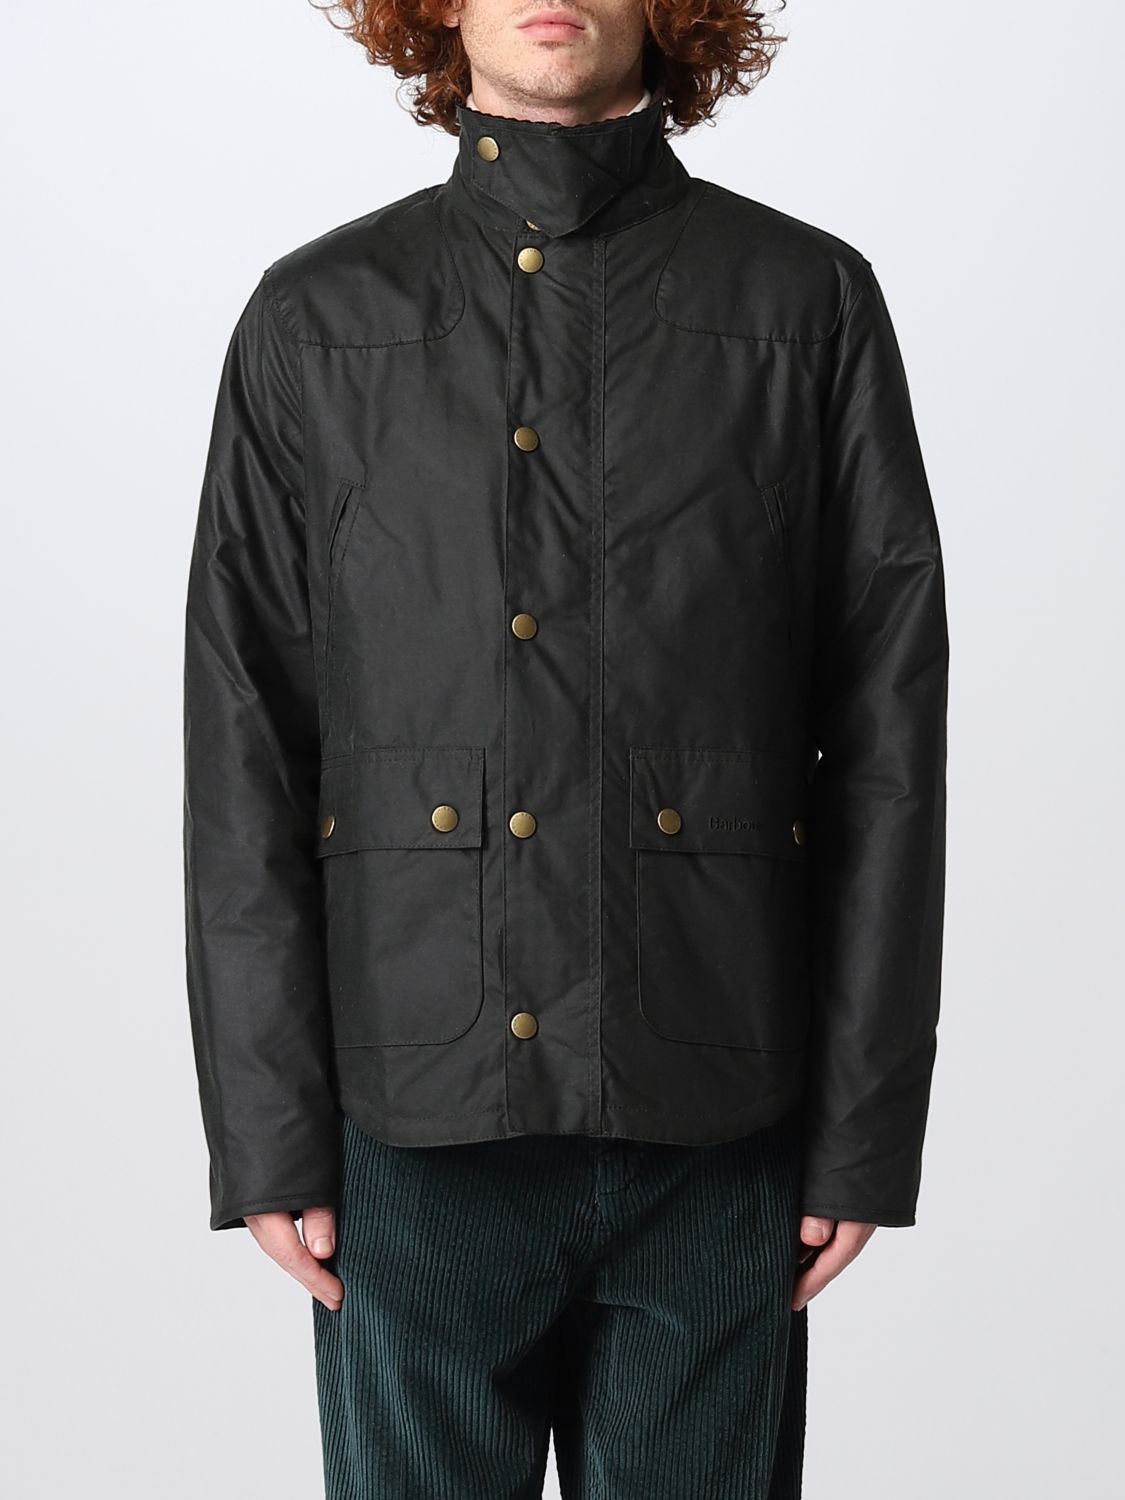 BARBOUR: jacket for man - Green | Barbour jacket MWX1106 online at ...